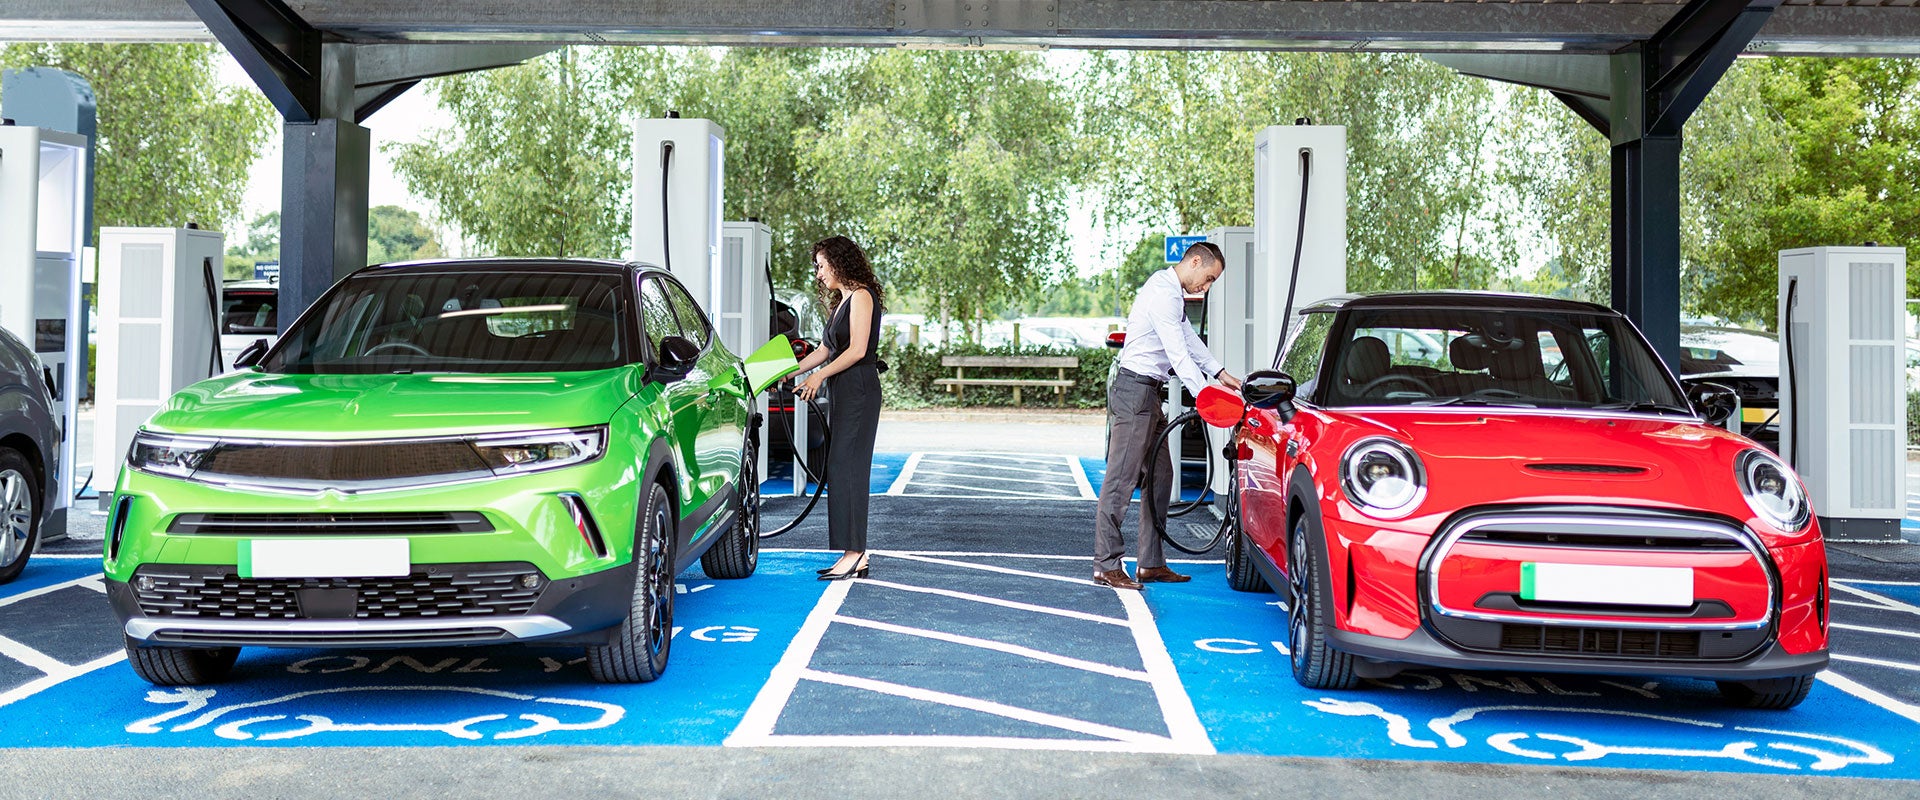 charging electric vehicles